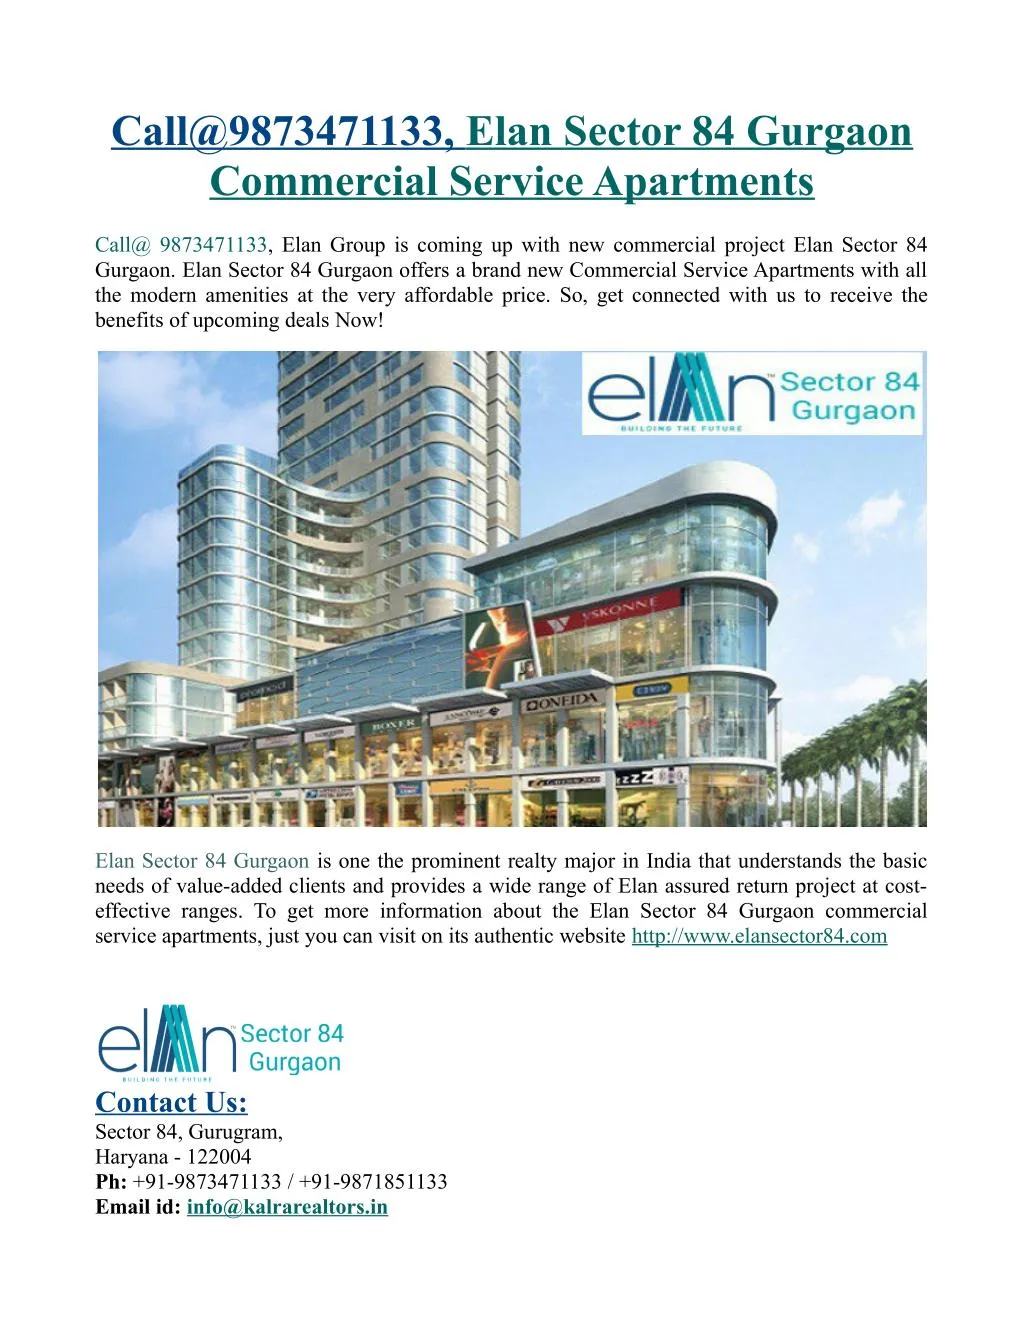 call@9873471133 commercial service apartments n.